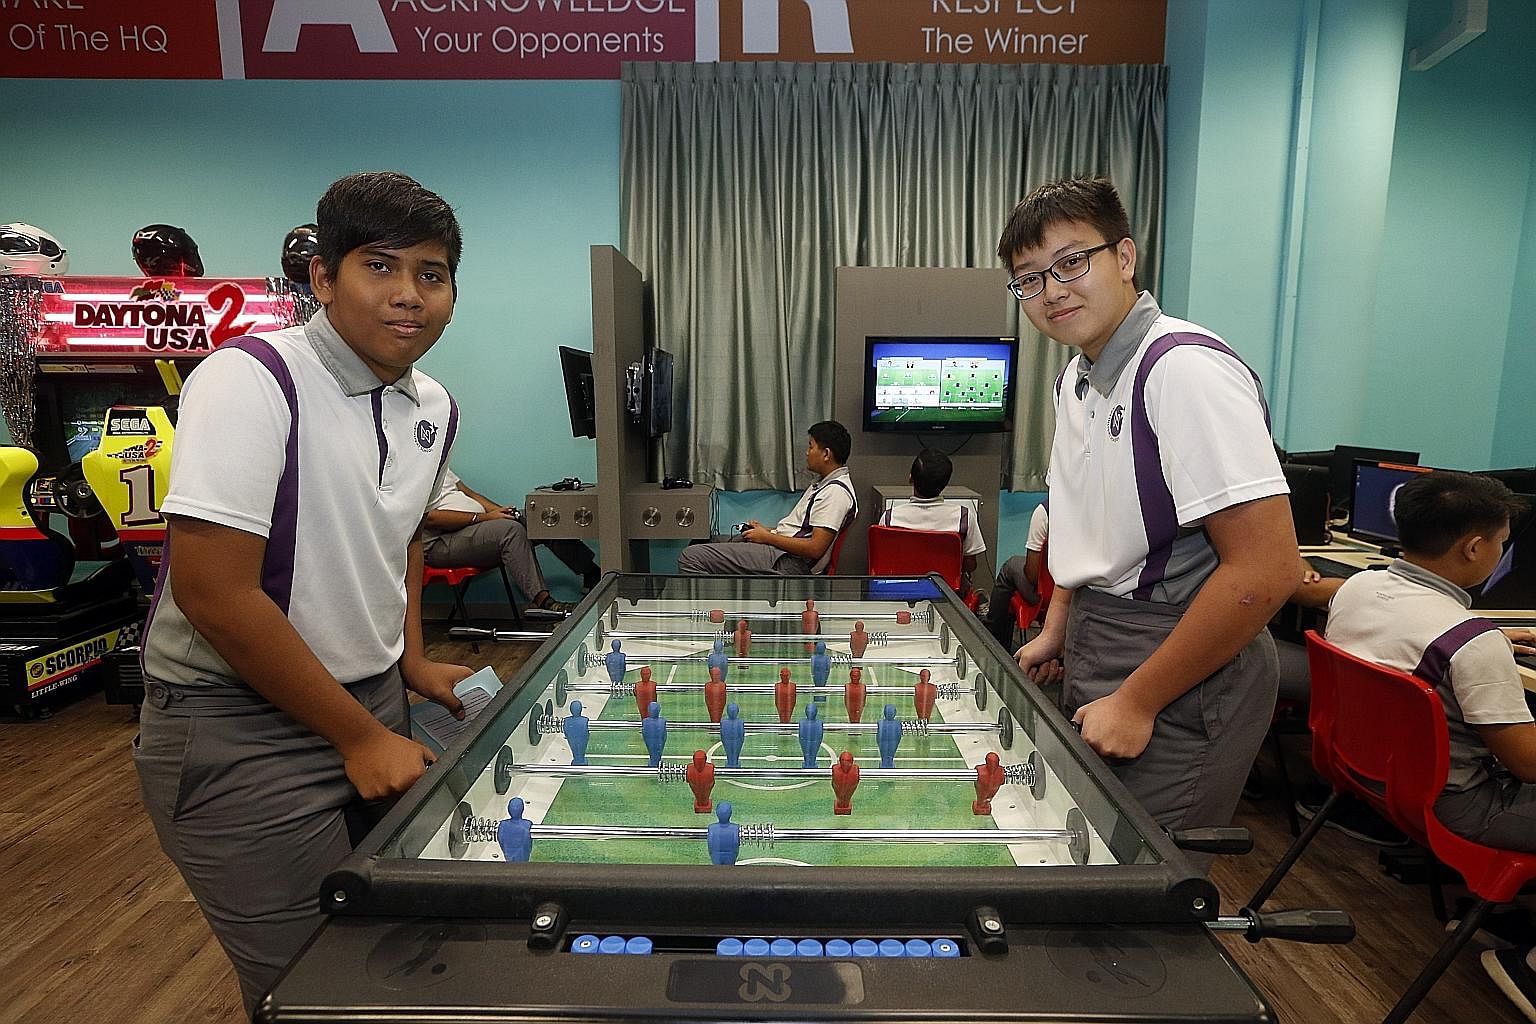 Singapore Children's Society's Project Cabin, which students have named "Games HQ", has Daytona arcade machines and Xbox games, a pool table and computers.